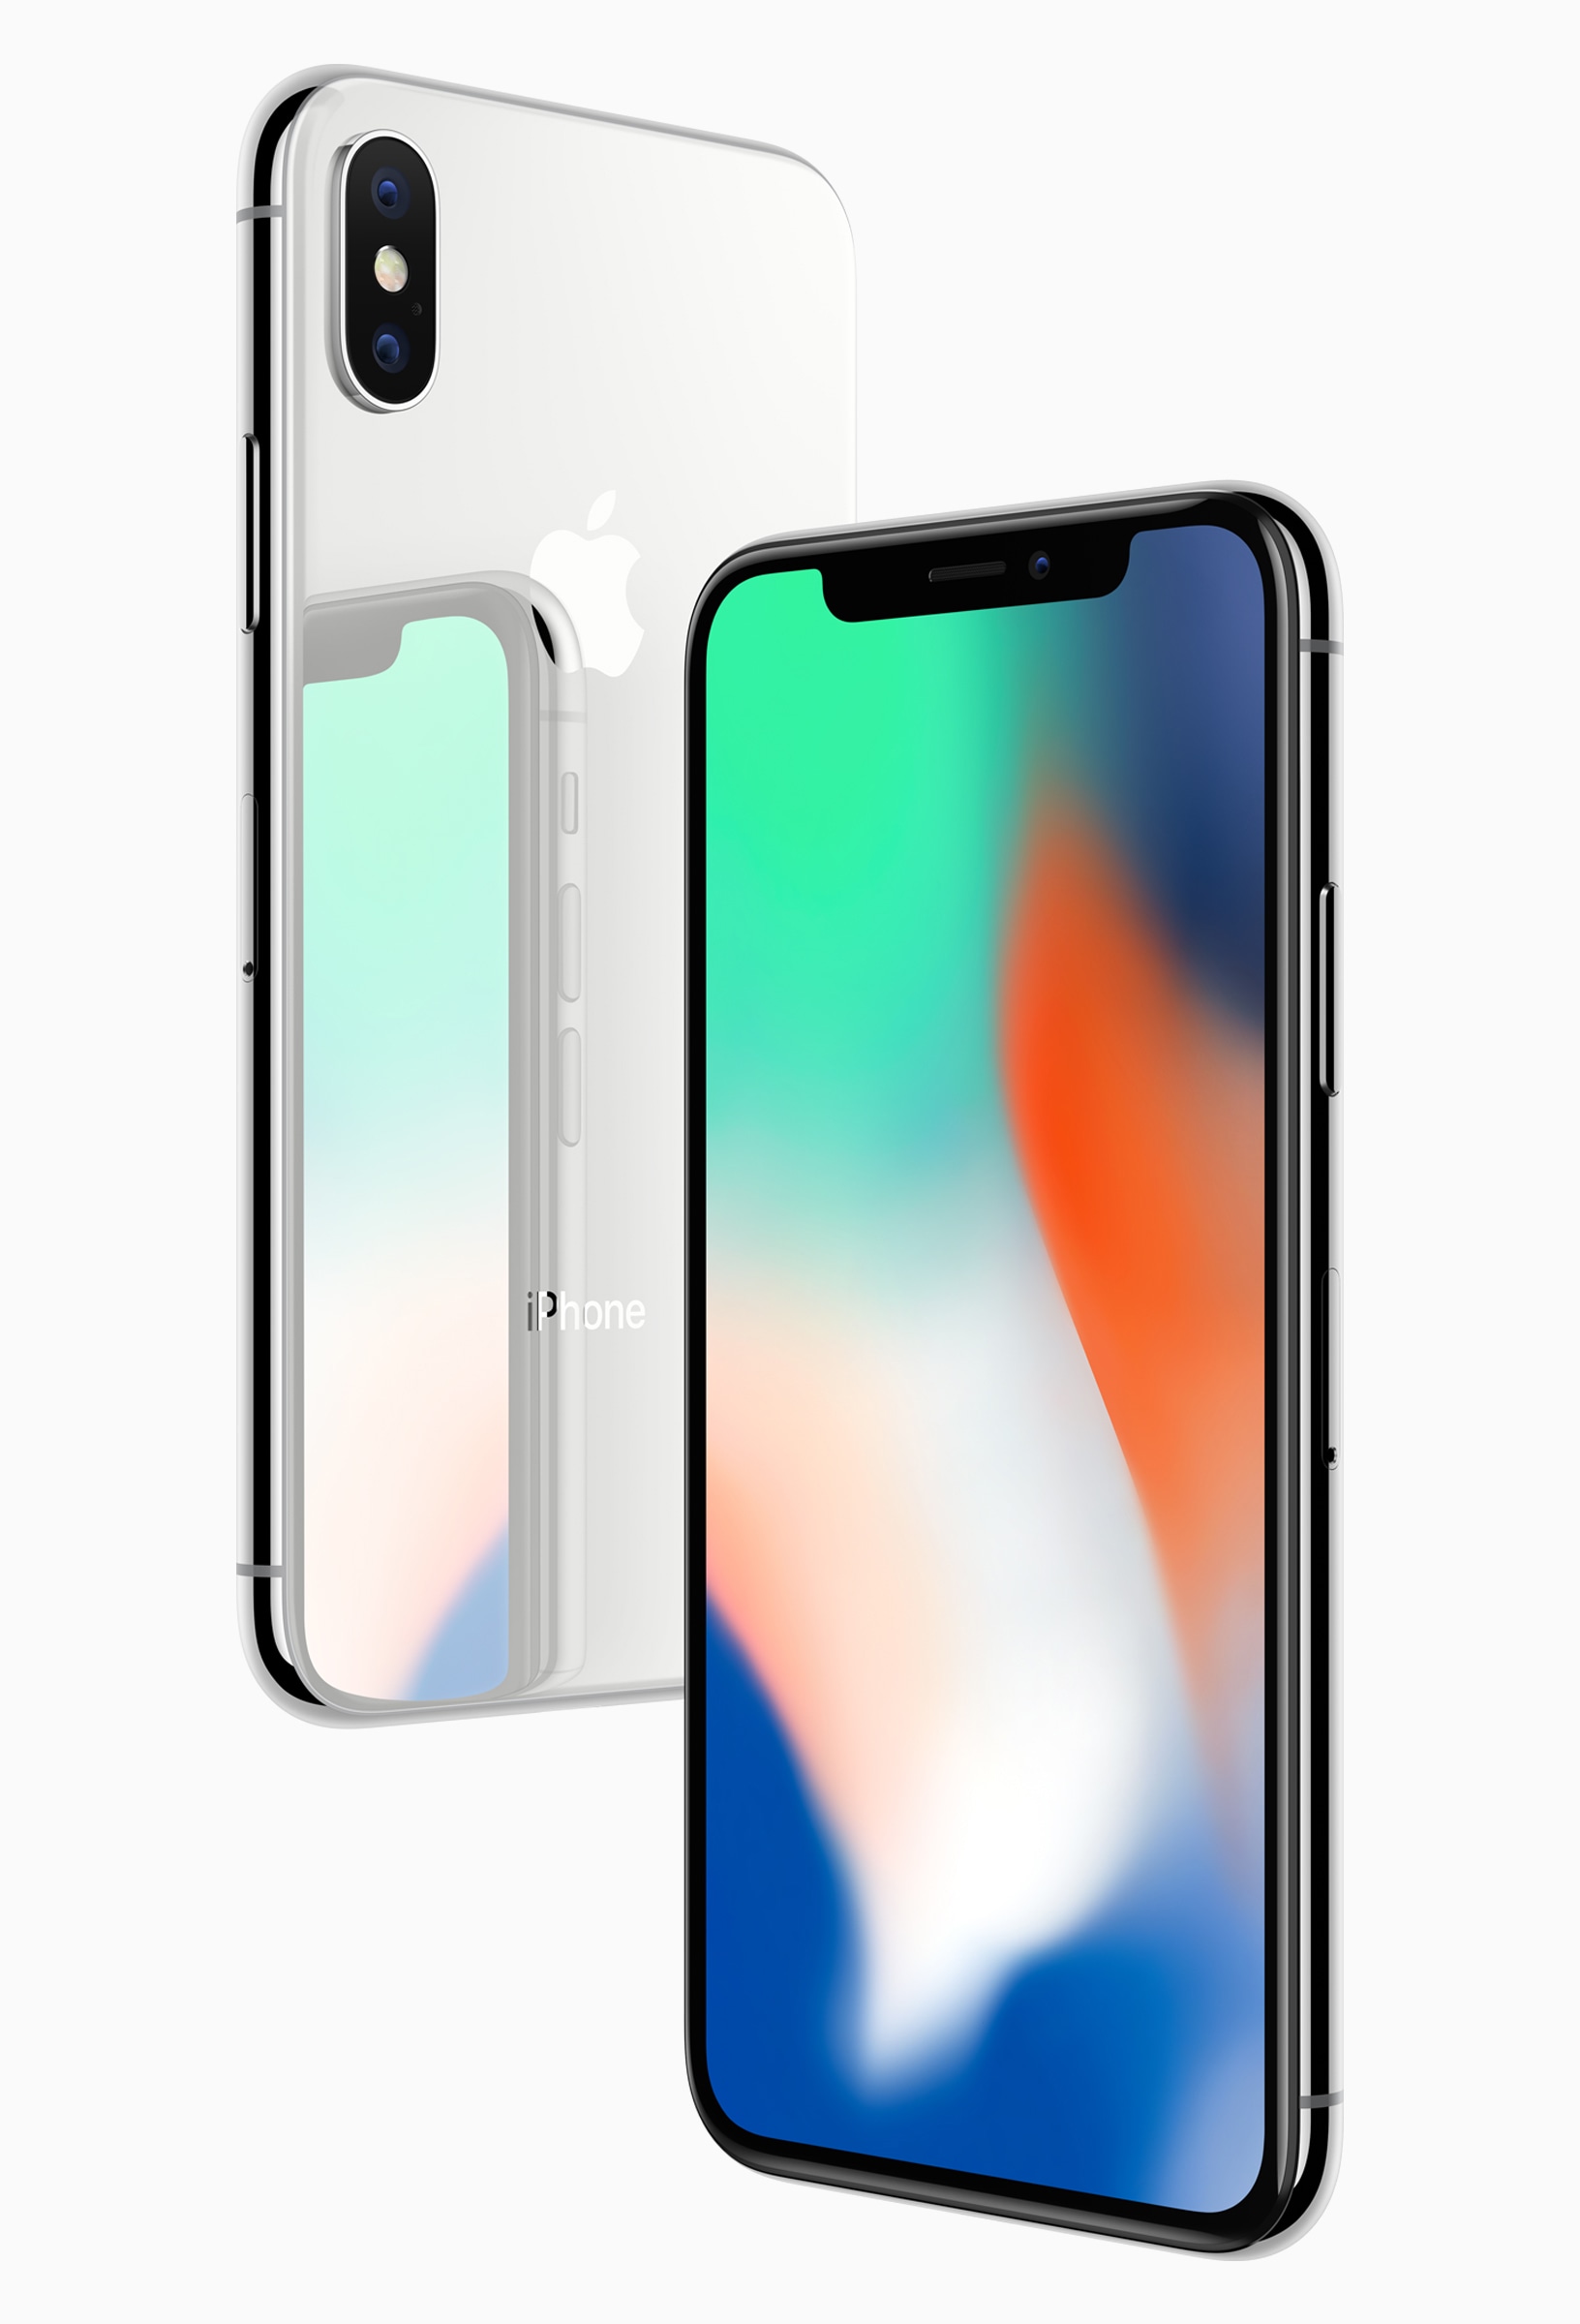 Silver iPhone X from the back and space gray diagonally from the front